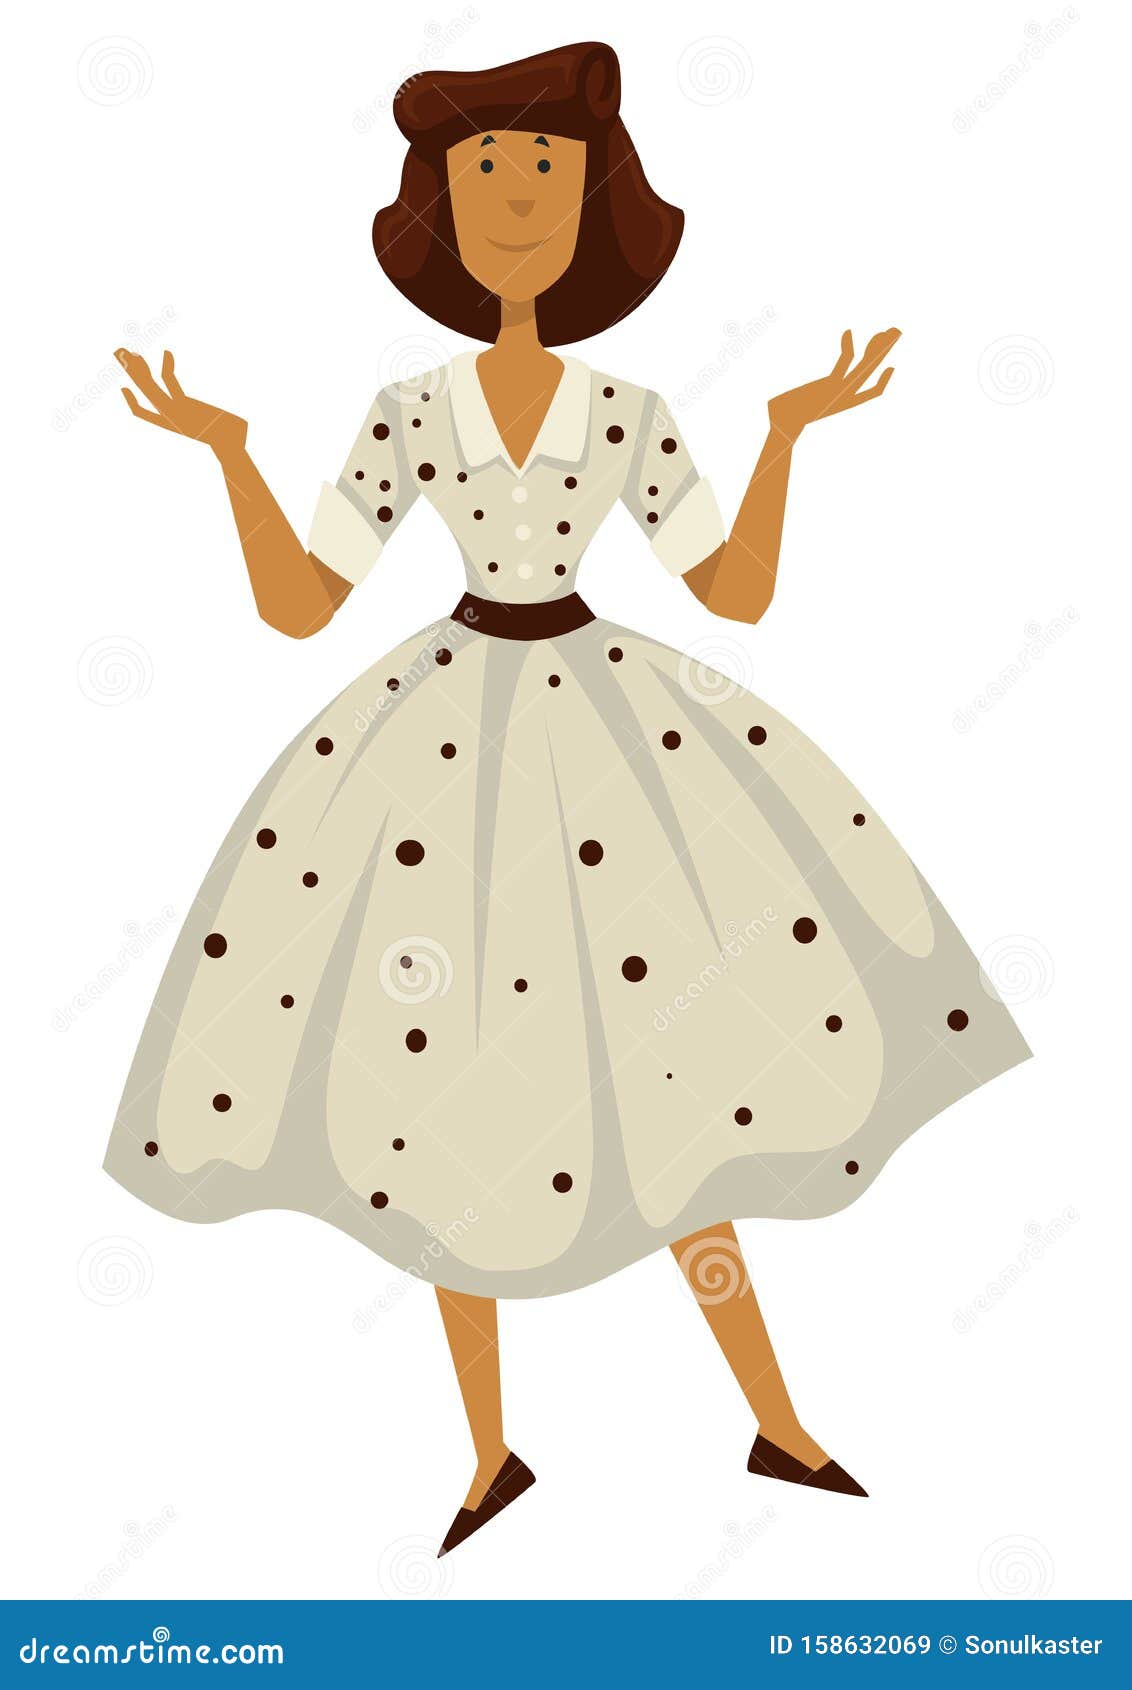 Woman in Polkadot Dress, 1950s Fashion Style. Isolated Female Character  Stock Vector - Illustration of collar, character: 158632069